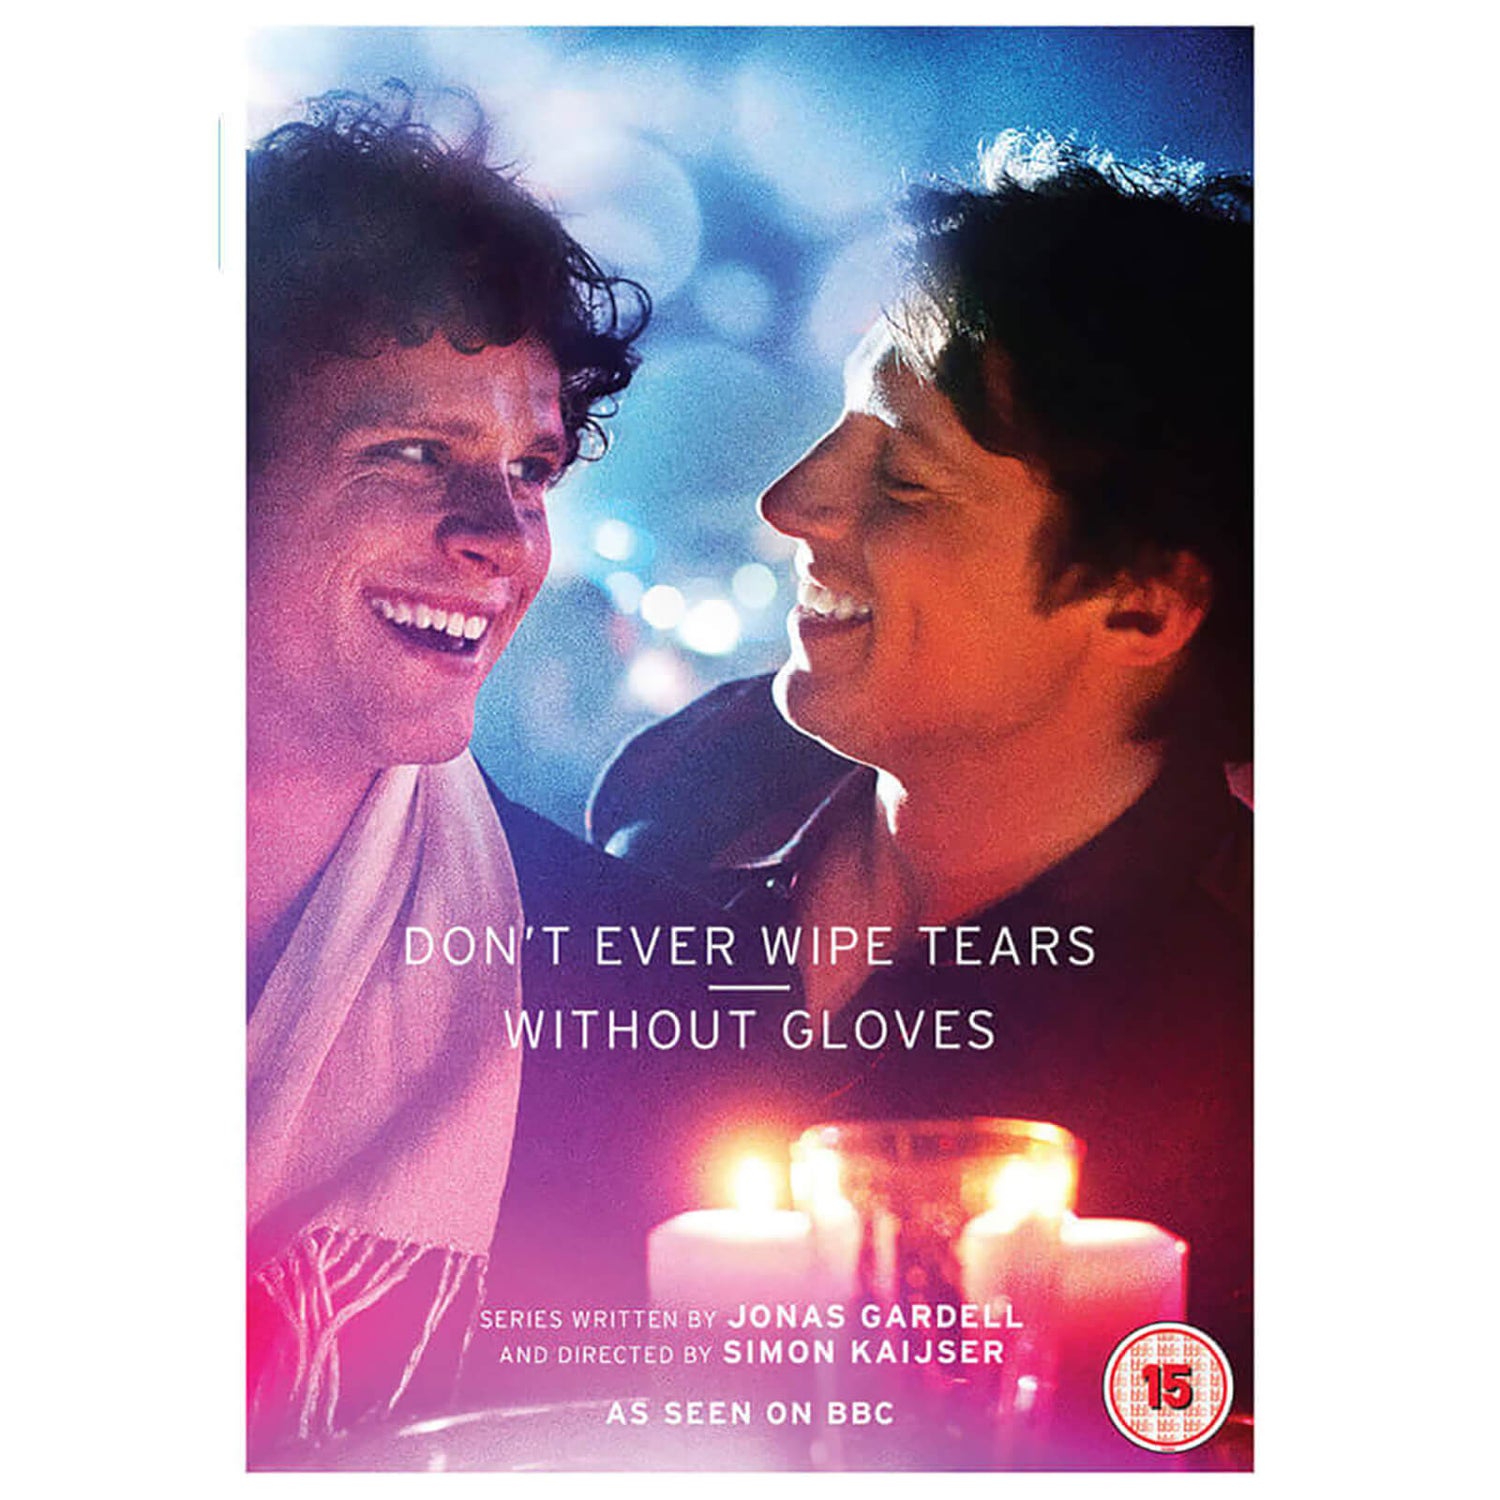 Don't Ever Wipe Tears Without Gloves DVD